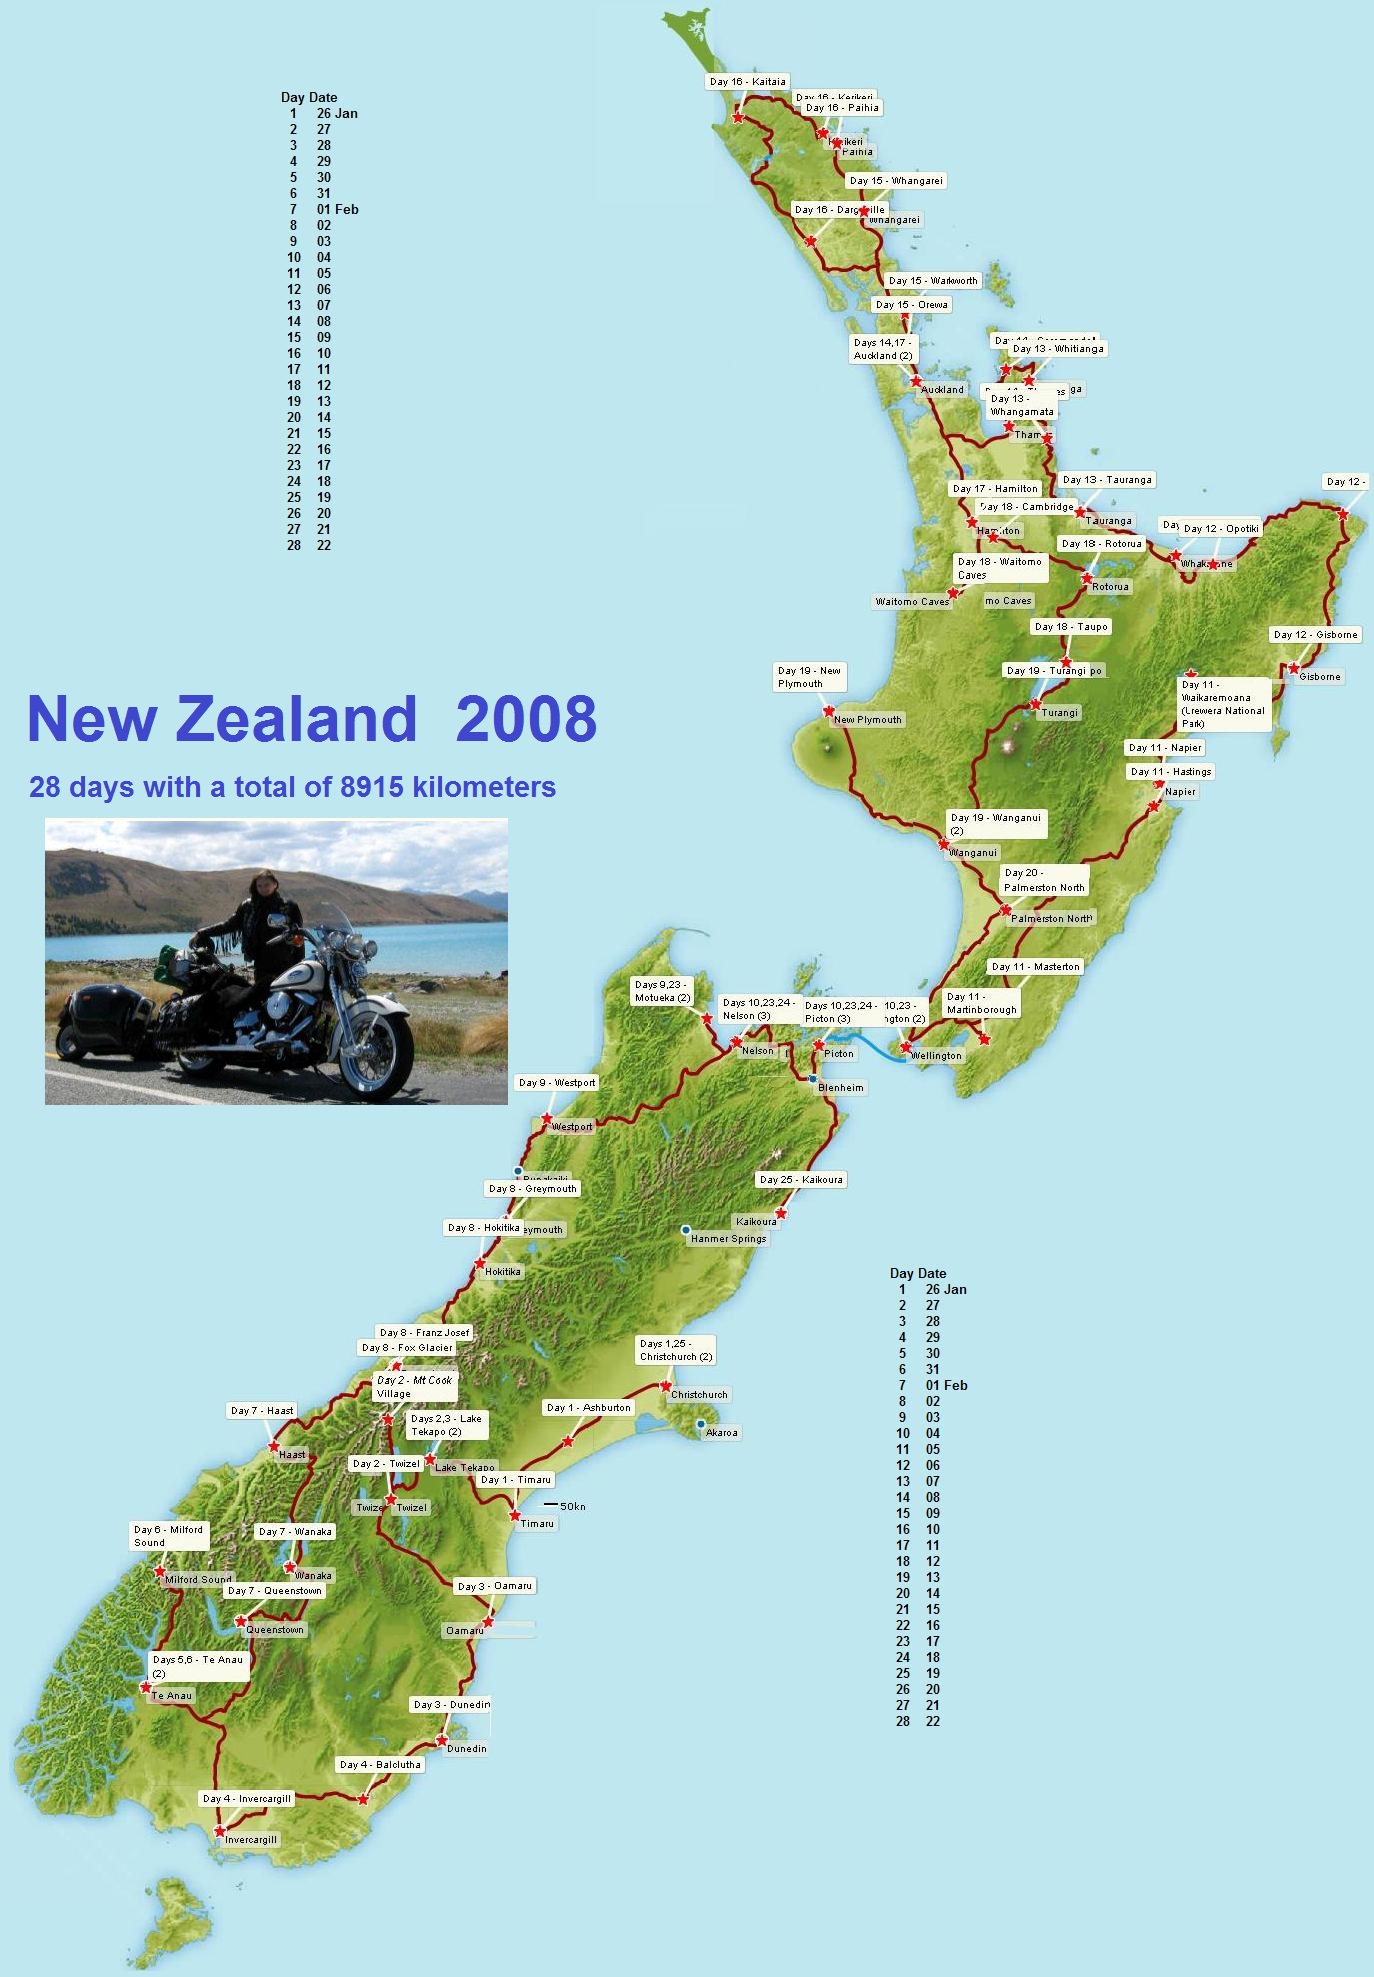 New Zealand travels in 2008 during just 28 days almost 9.000 kilometers